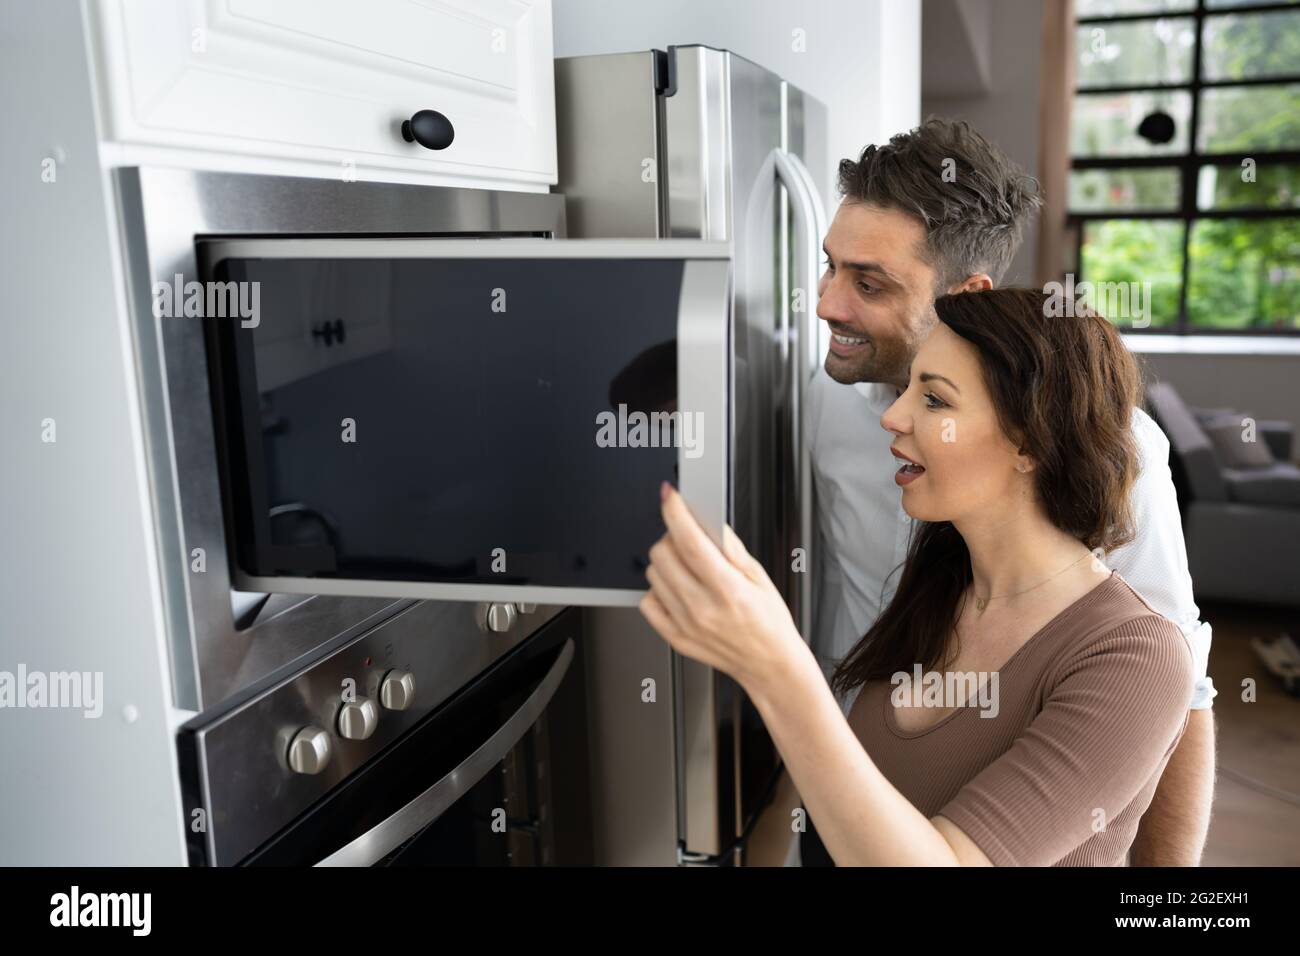 Couple Microwave Electrical Oven With Consumer Loan Credit Stock Photo